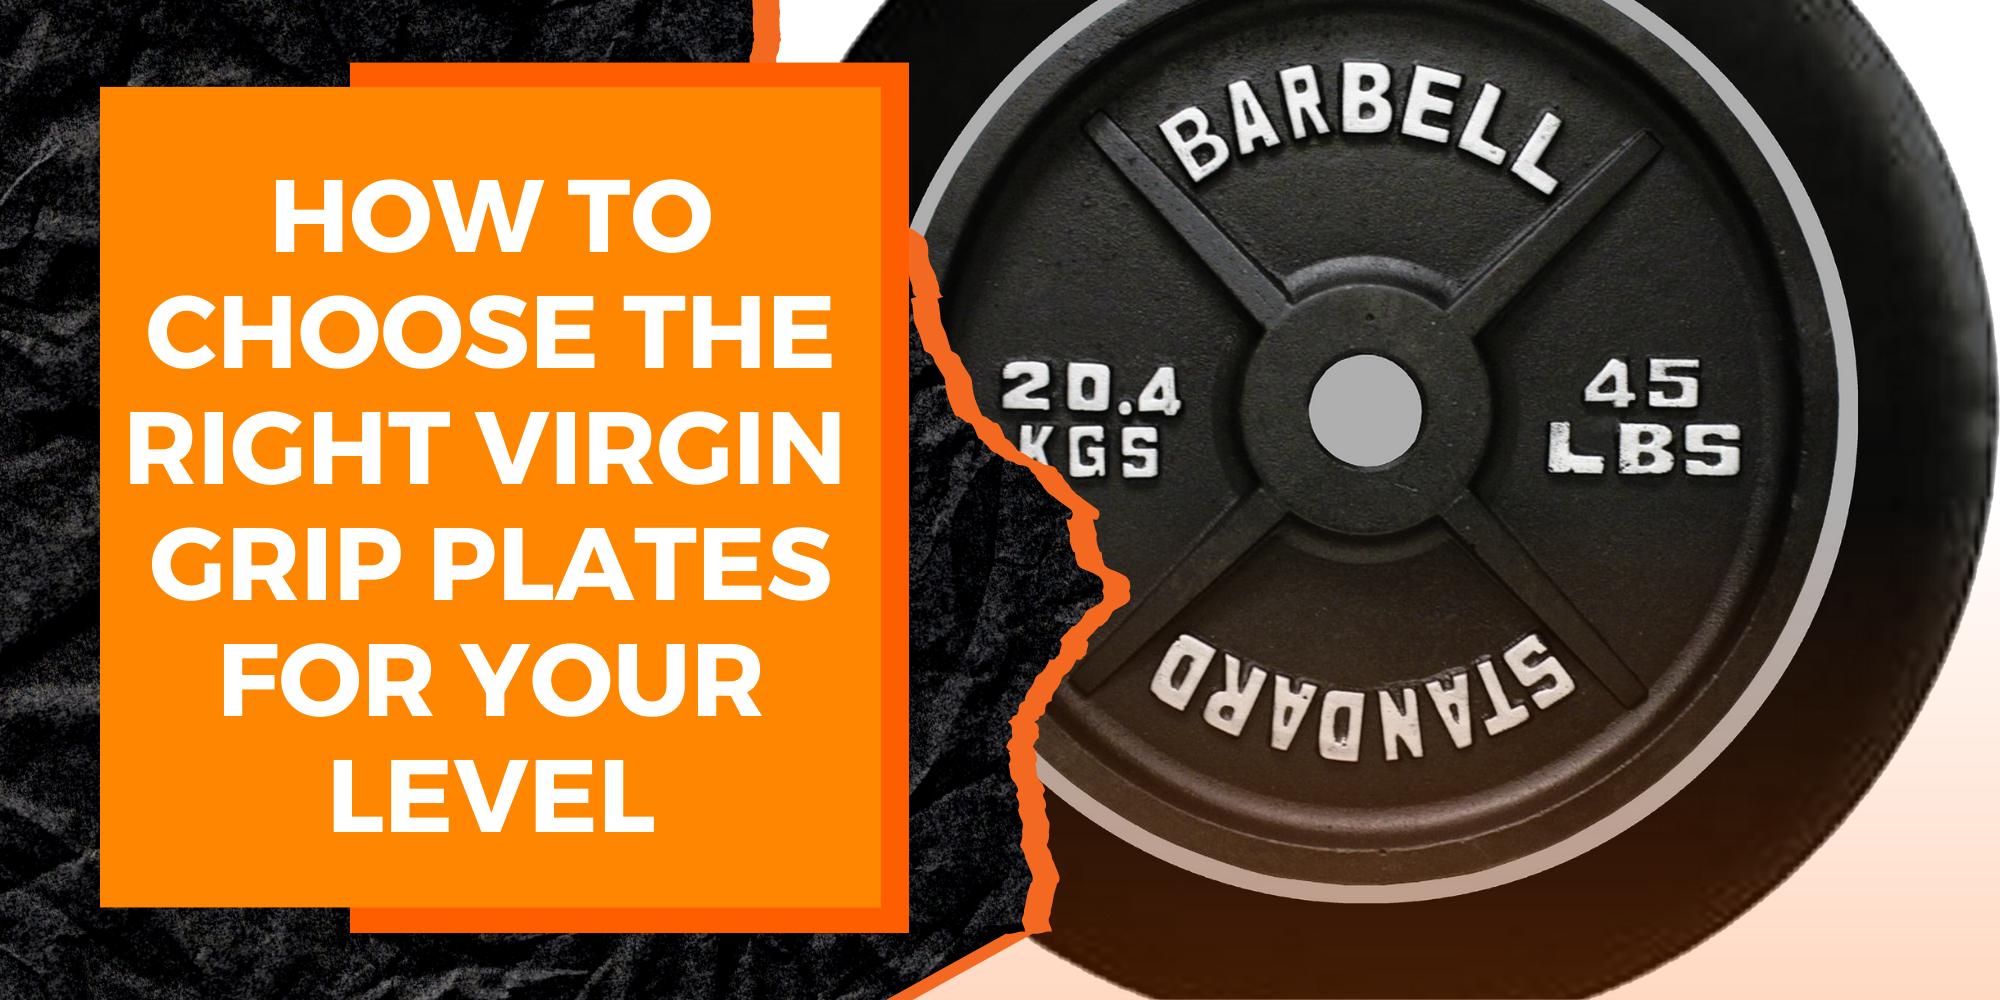 How to Choose the Right Virgin Rubber Grip Plates for Your Fitness Level